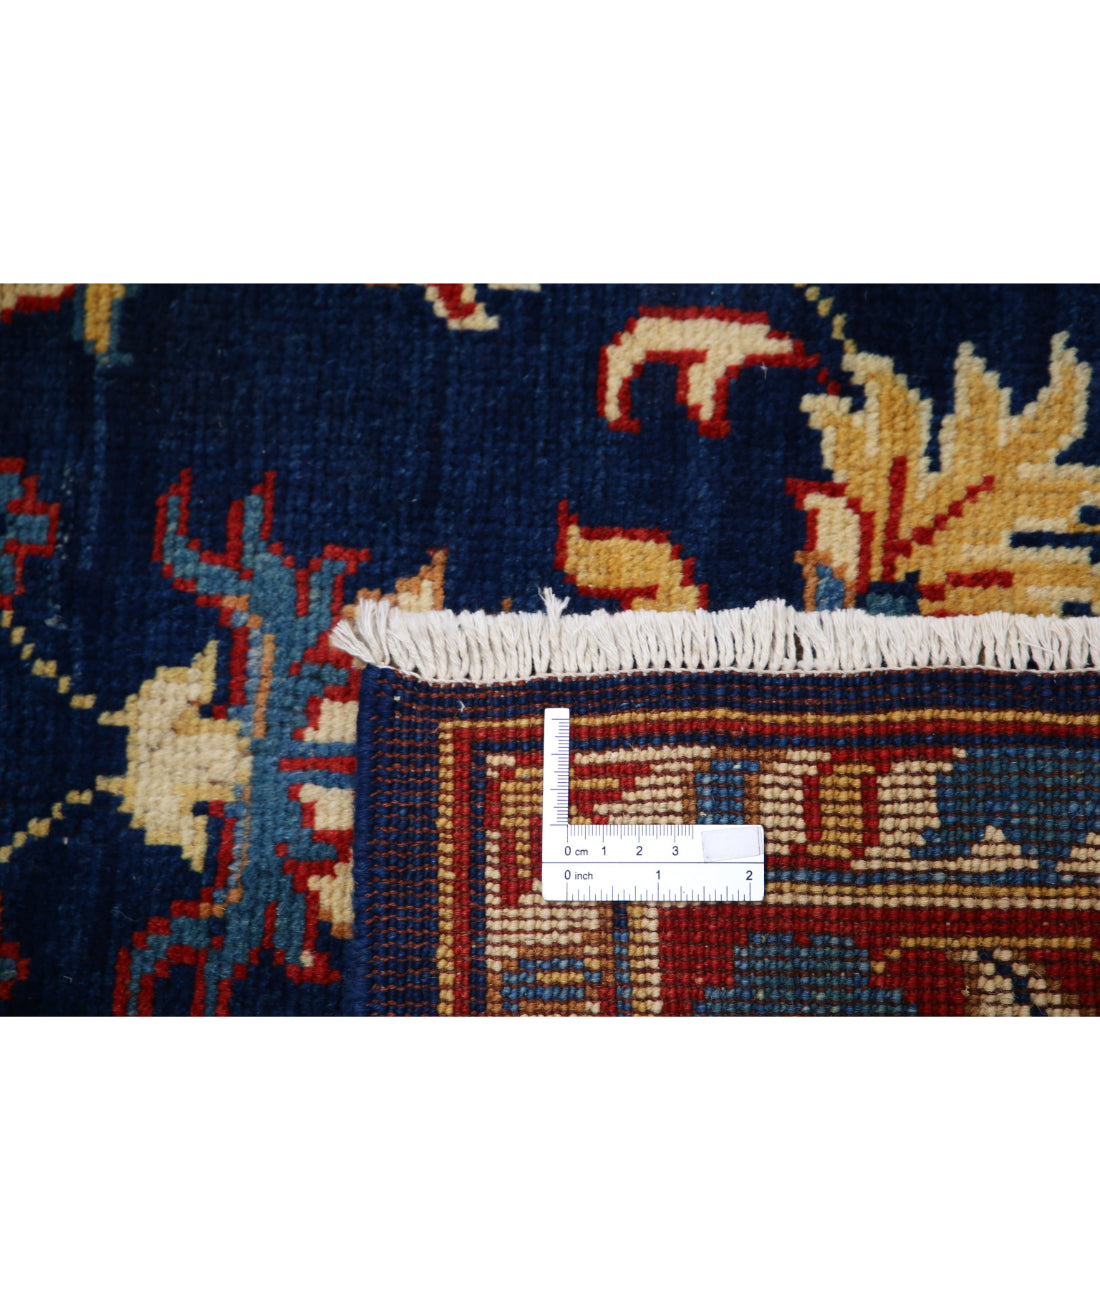 Ziegler 3'0'' X 4'8'' Hand-Knotted Wool Rug 3'0'' x 4'8'' (90 X 140) / Blue / N/A